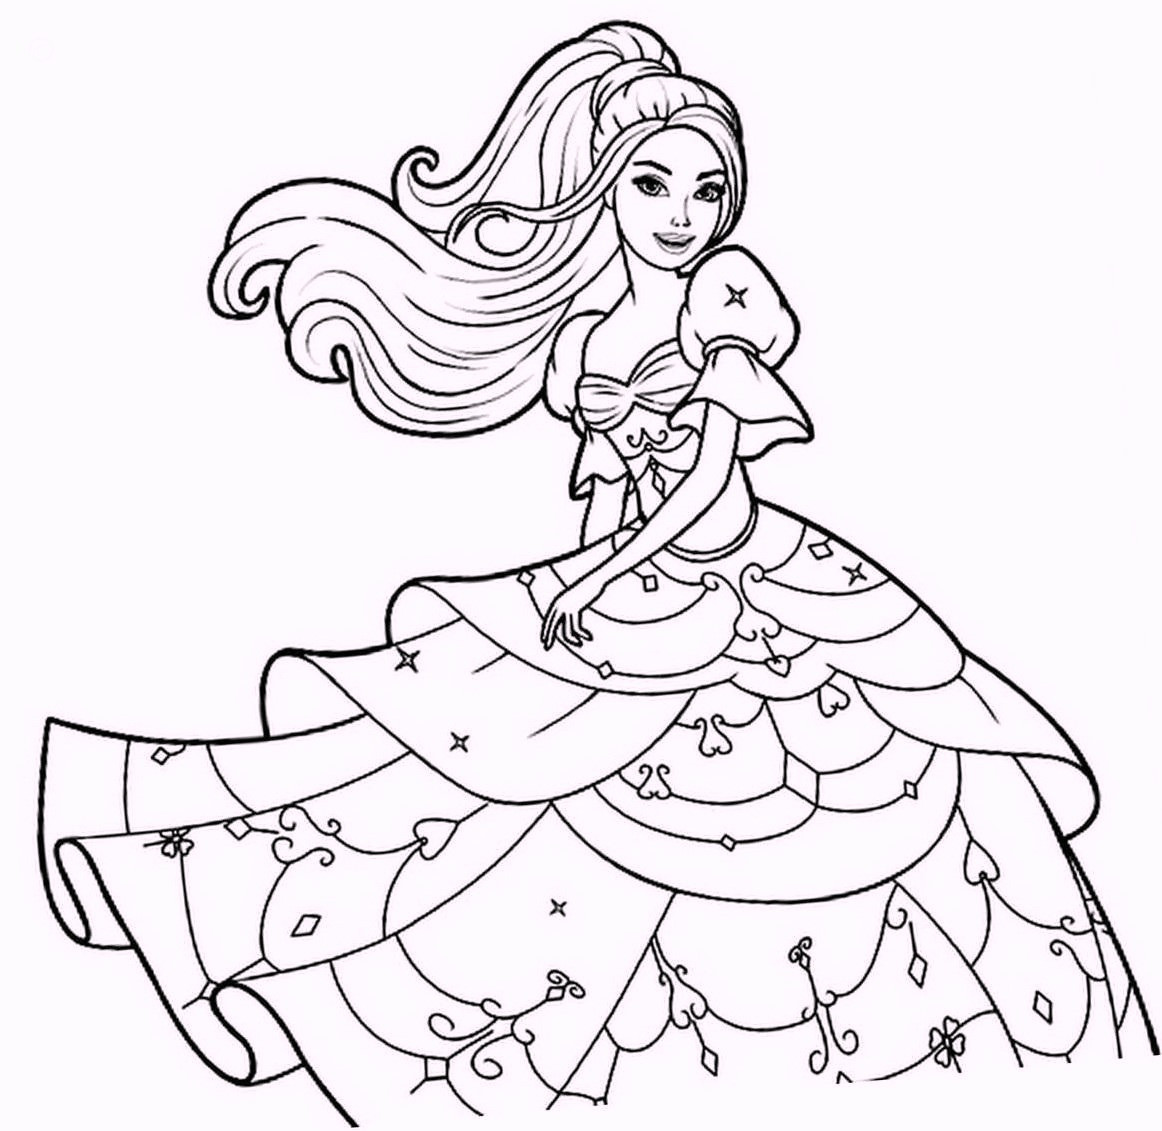 Fashion Coloring Pages For Girls
 fashion dress coloring pages for girls